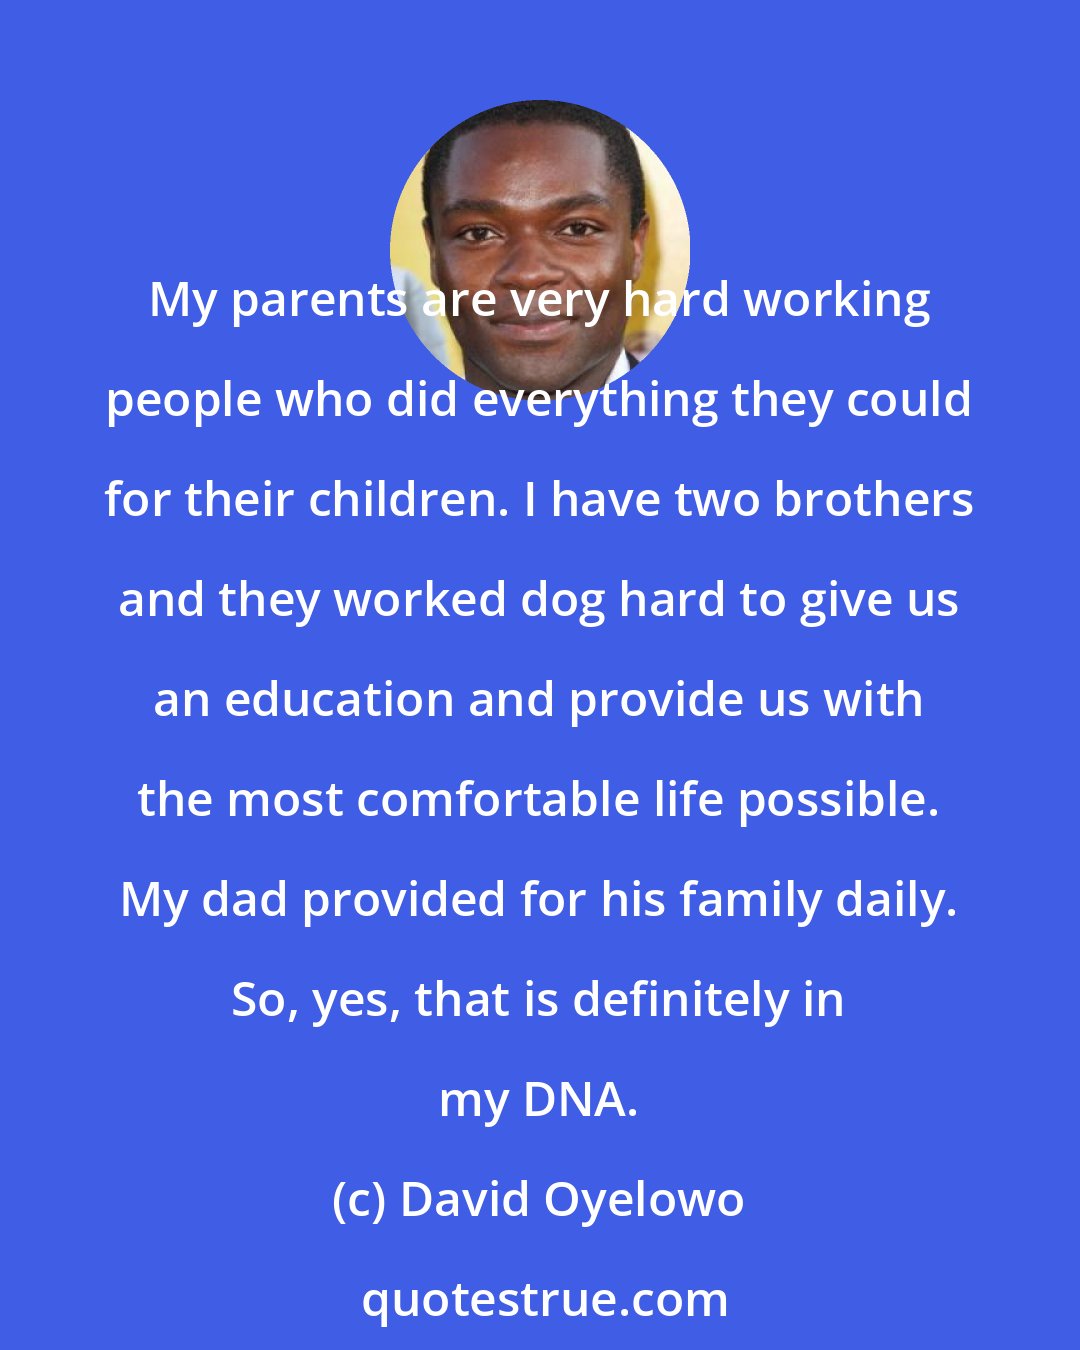 David Oyelowo: My parents are very hard working people who did everything they could for their children. I have two brothers and they worked dog hard to give us an education and provide us with the most comfortable life possible. My dad provided for his family daily. So, yes, that is definitely in my DNA.